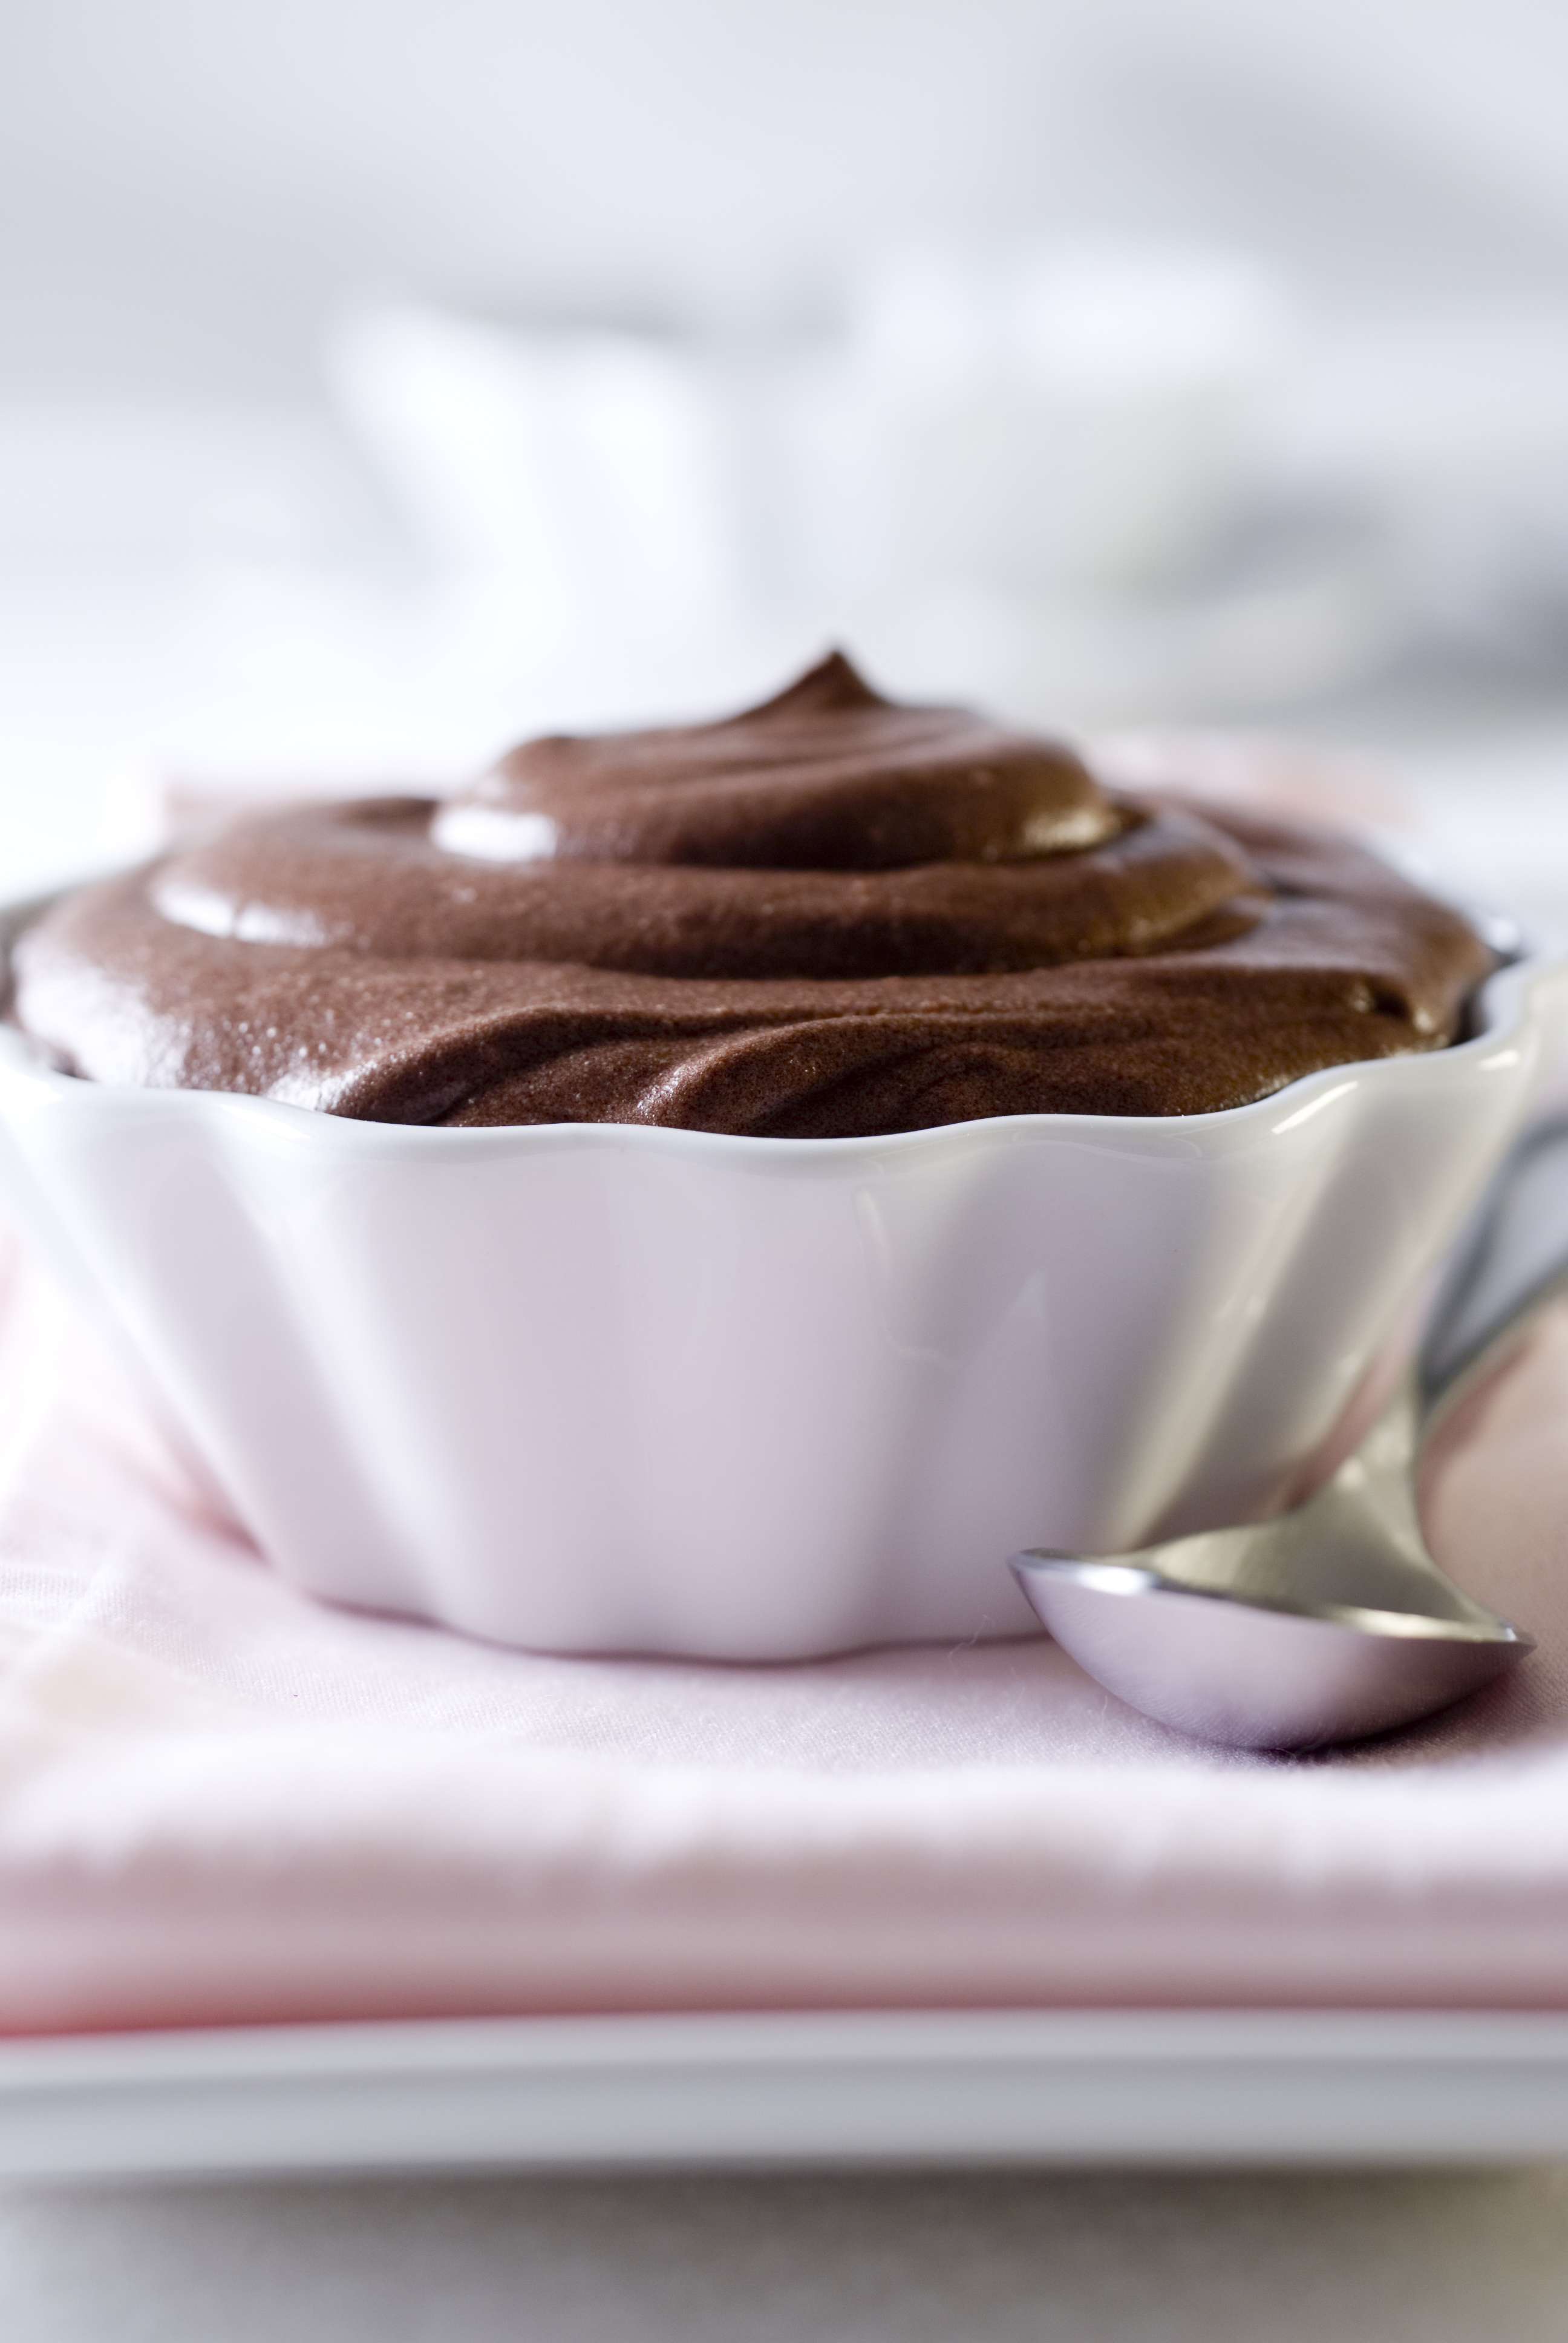 Vegan Chocolate Mousse - Now this is a dessert you can feel good about! Chocolatey, dairy-free deliciousness, ready to serve in an hour or less. via @thiswifecooks